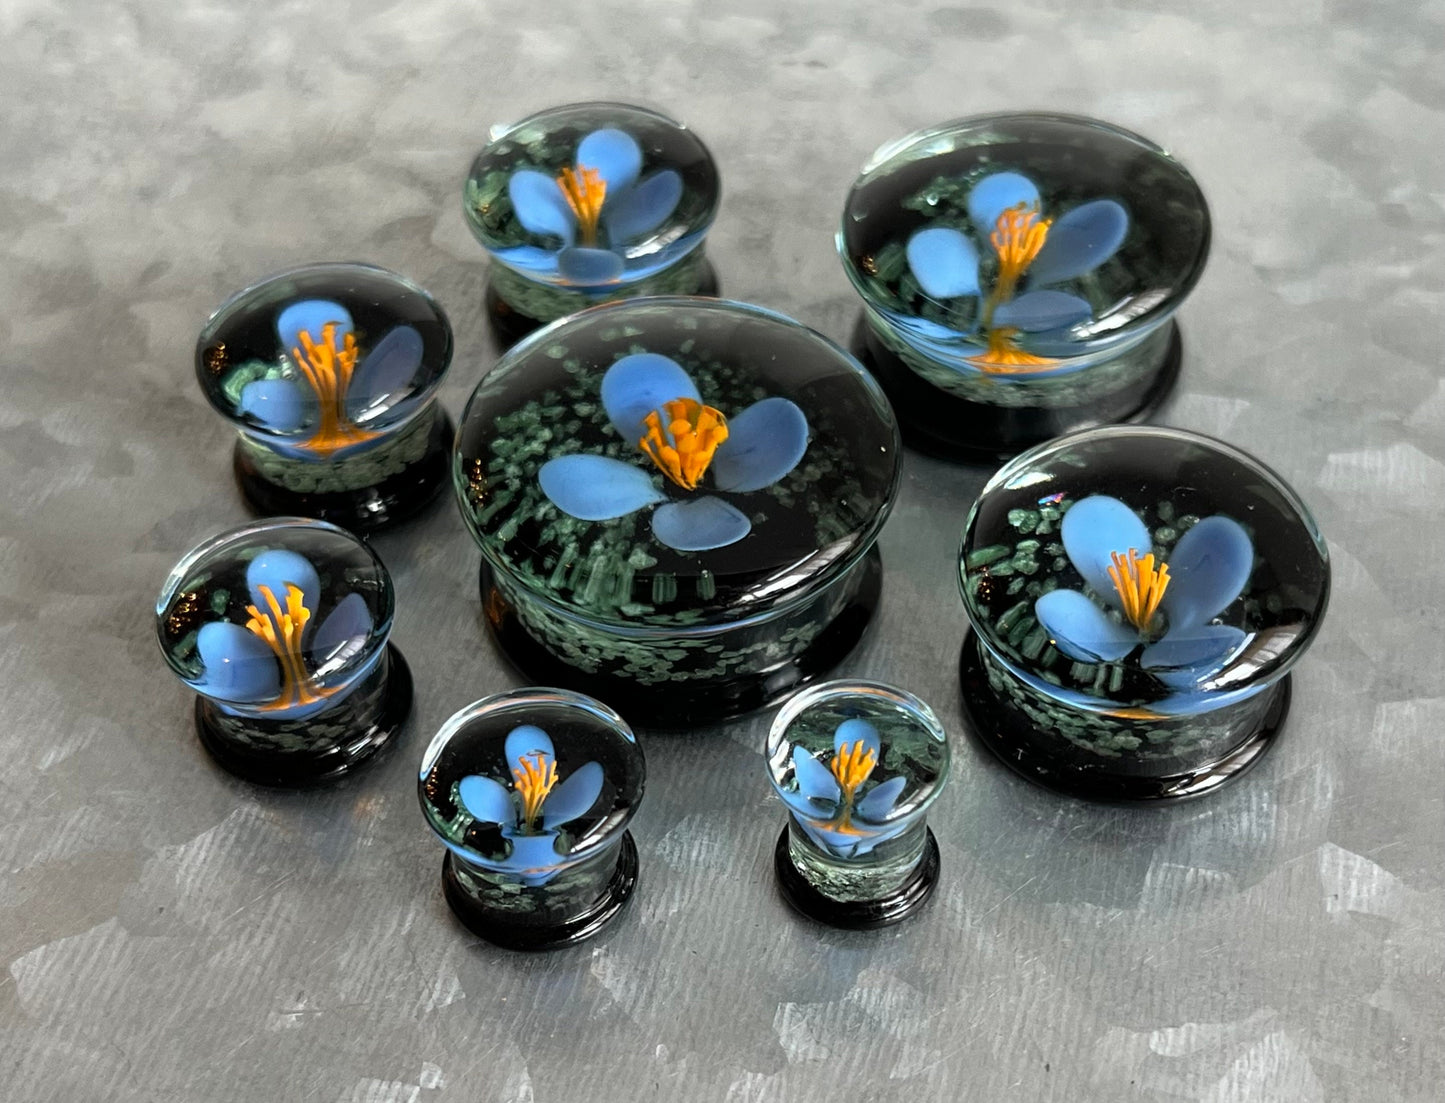 PAIR of Unique Floating Blue Flower Pyrex Glass Glow the the Dark Double Flare Plugs - Gauges 0g (8mm) through 1" (25mm) available!